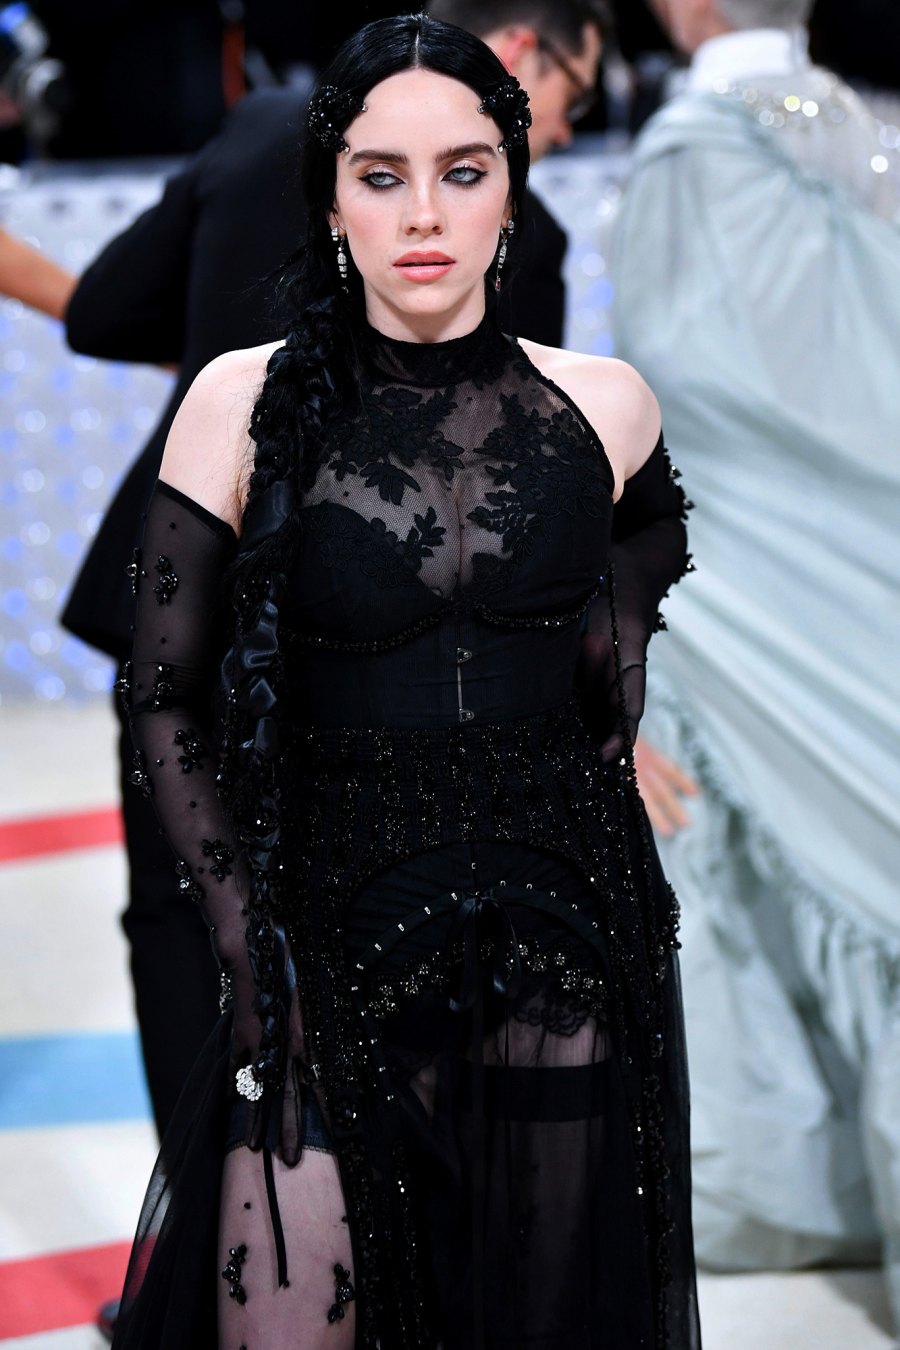 Billie Eilish Stuns at the 2023 Met Gala Red Carpet in a Sheer Black Gown: Photos